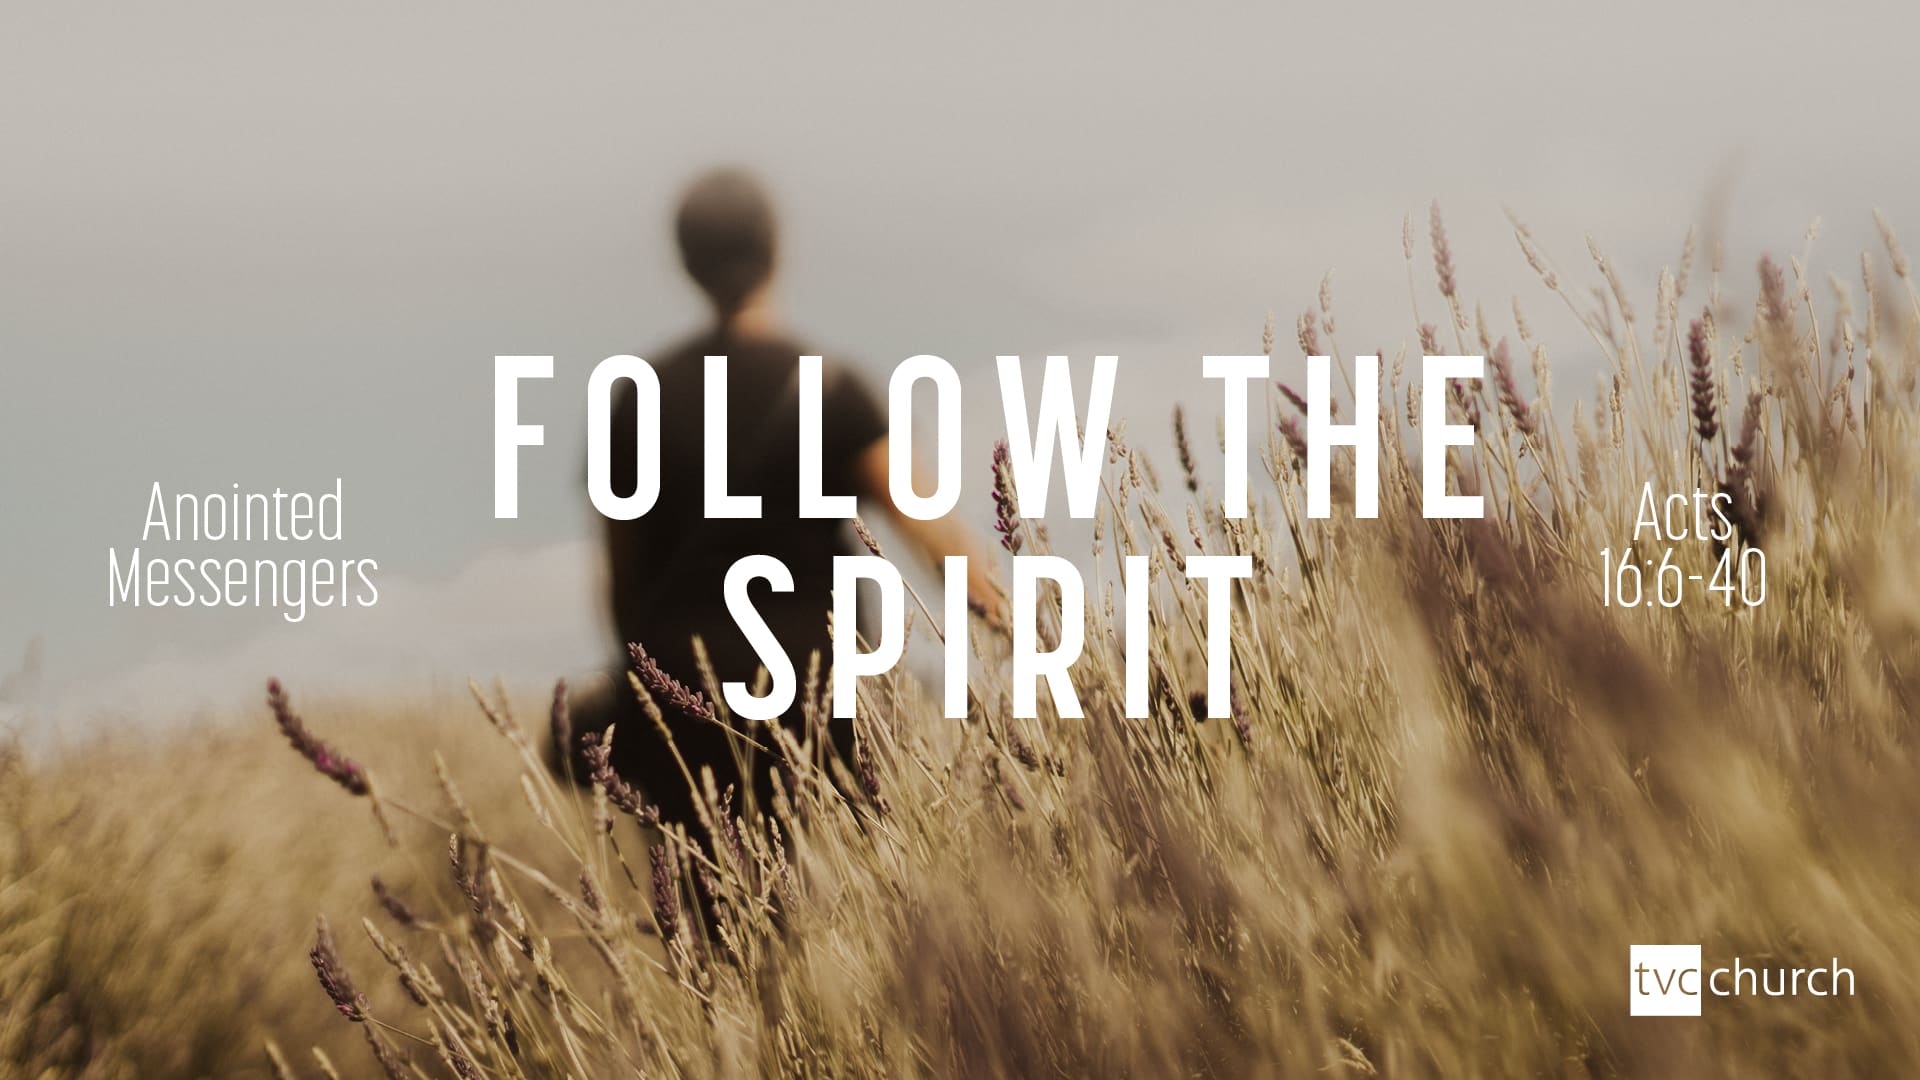 Anointed Messengers… follow the spirit.